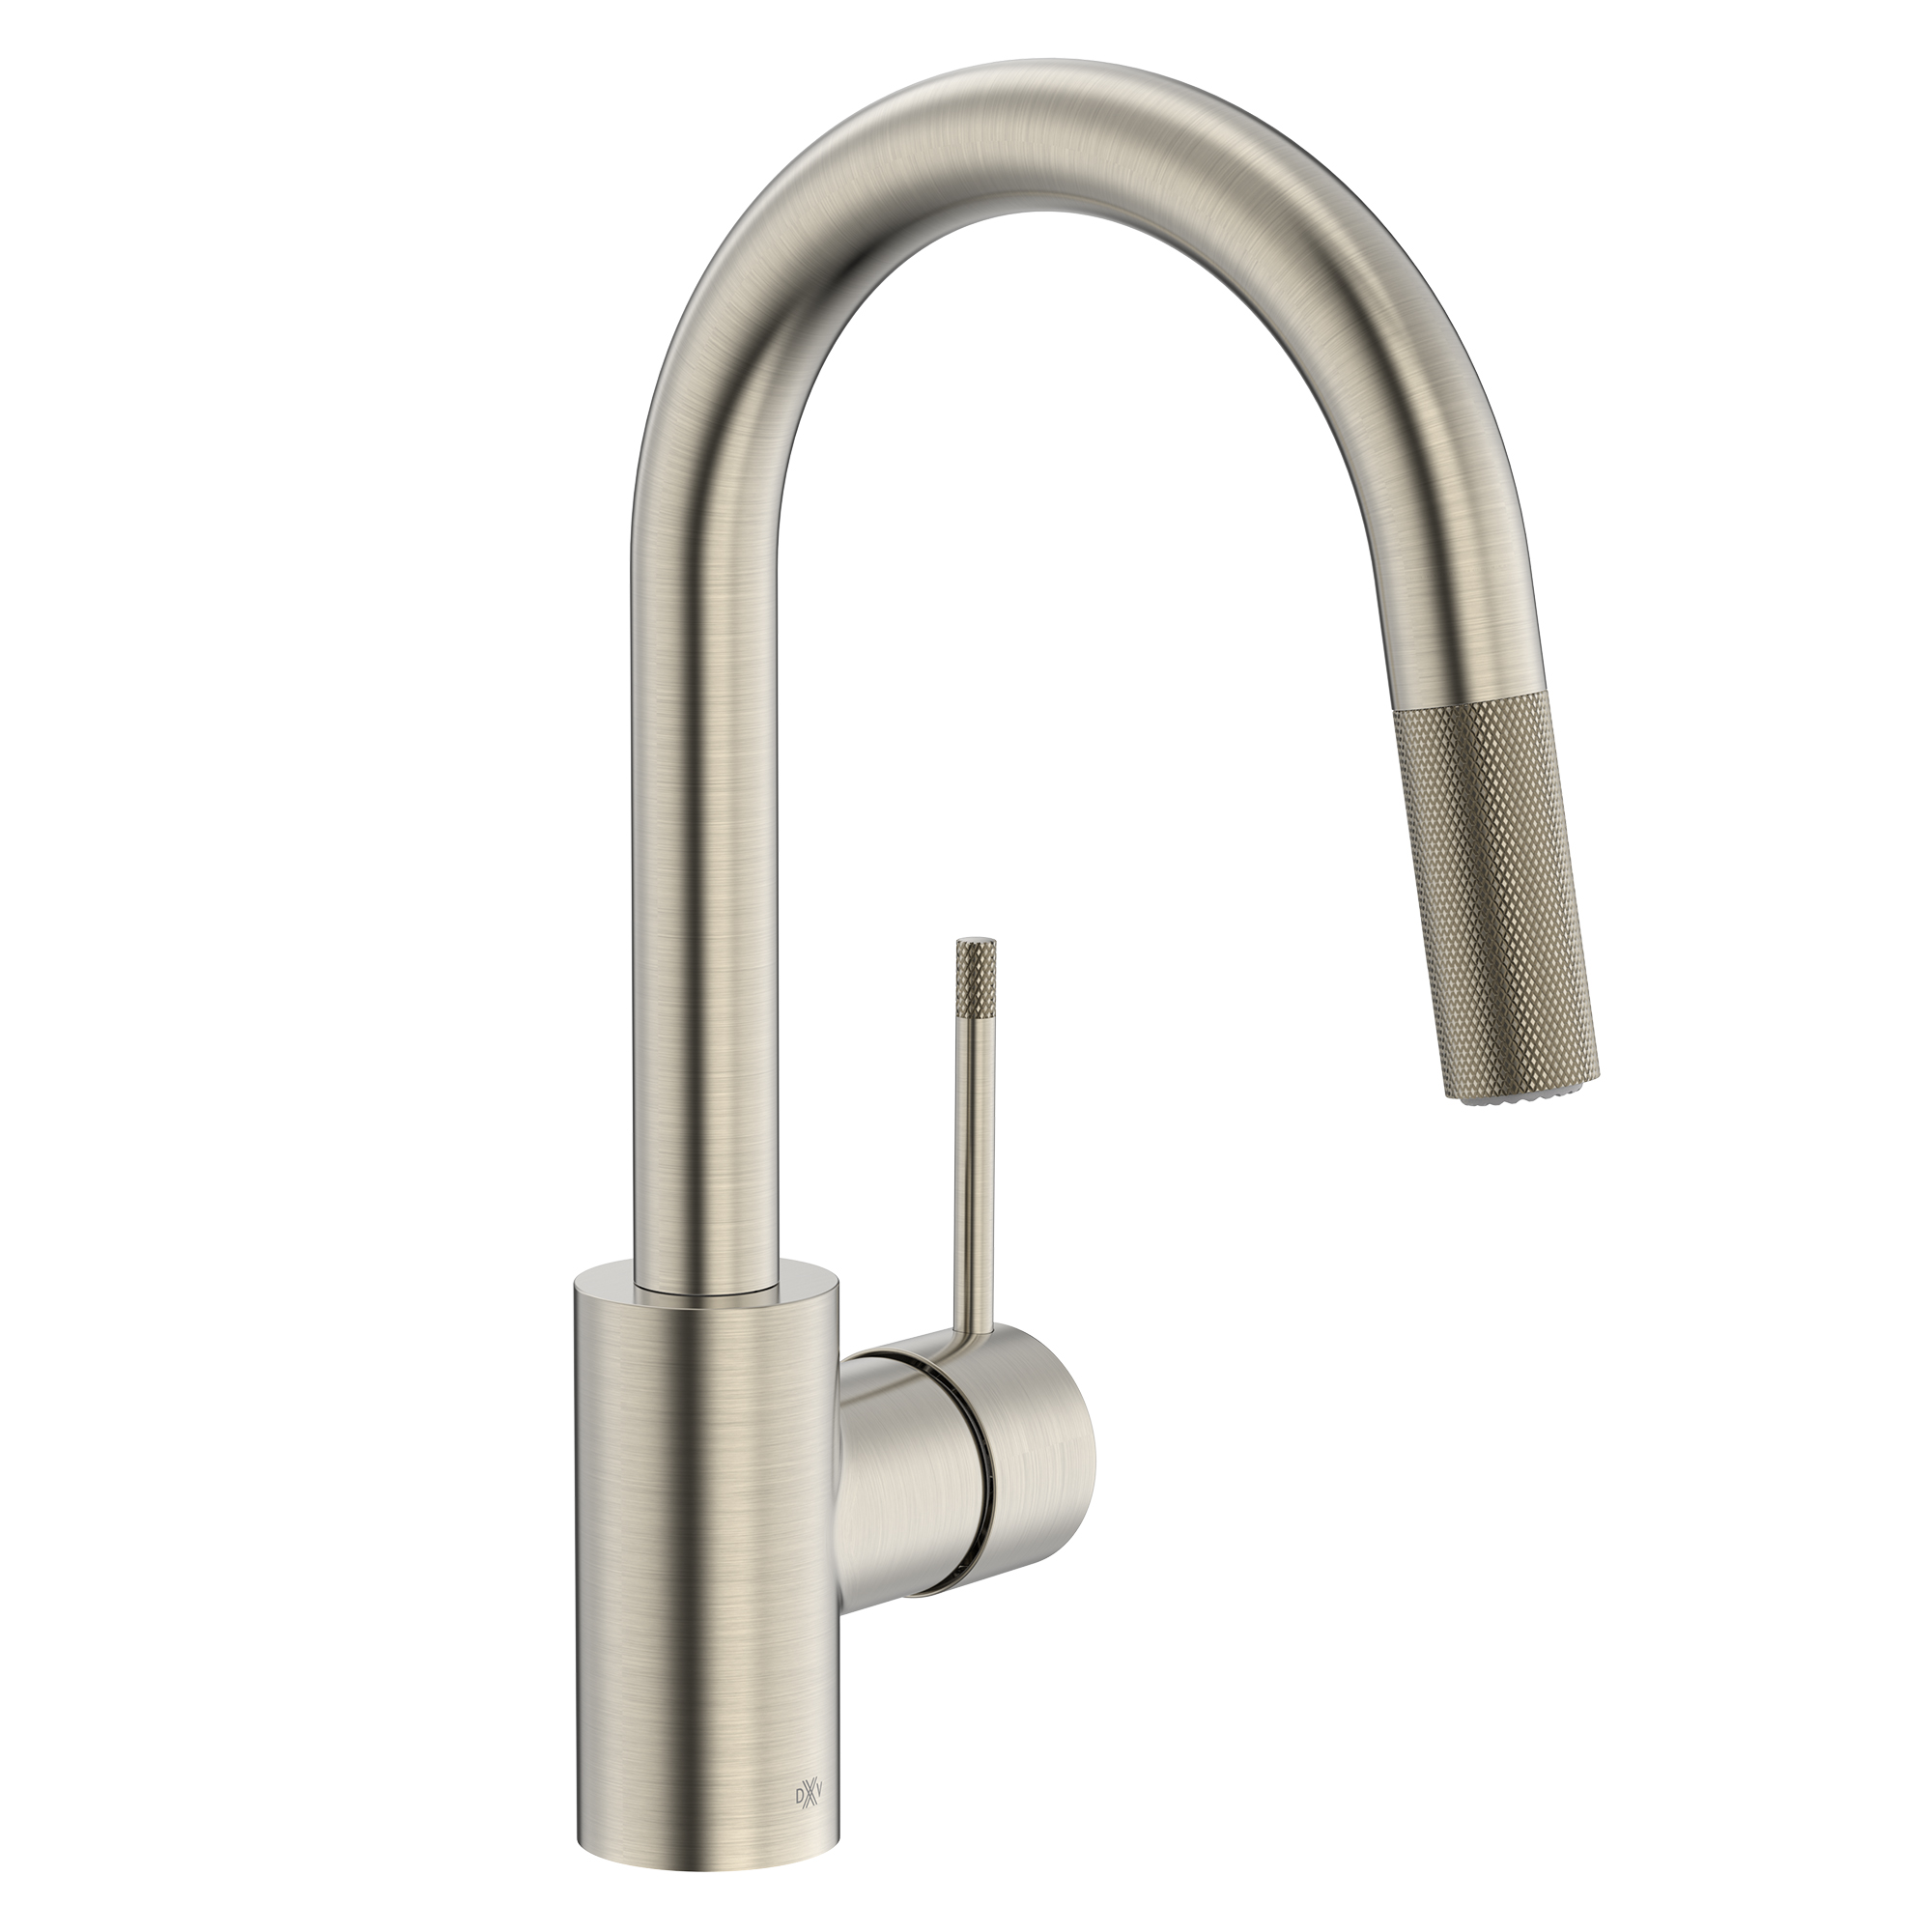 Etre Single Handle Bar Faucet with Lever Handle